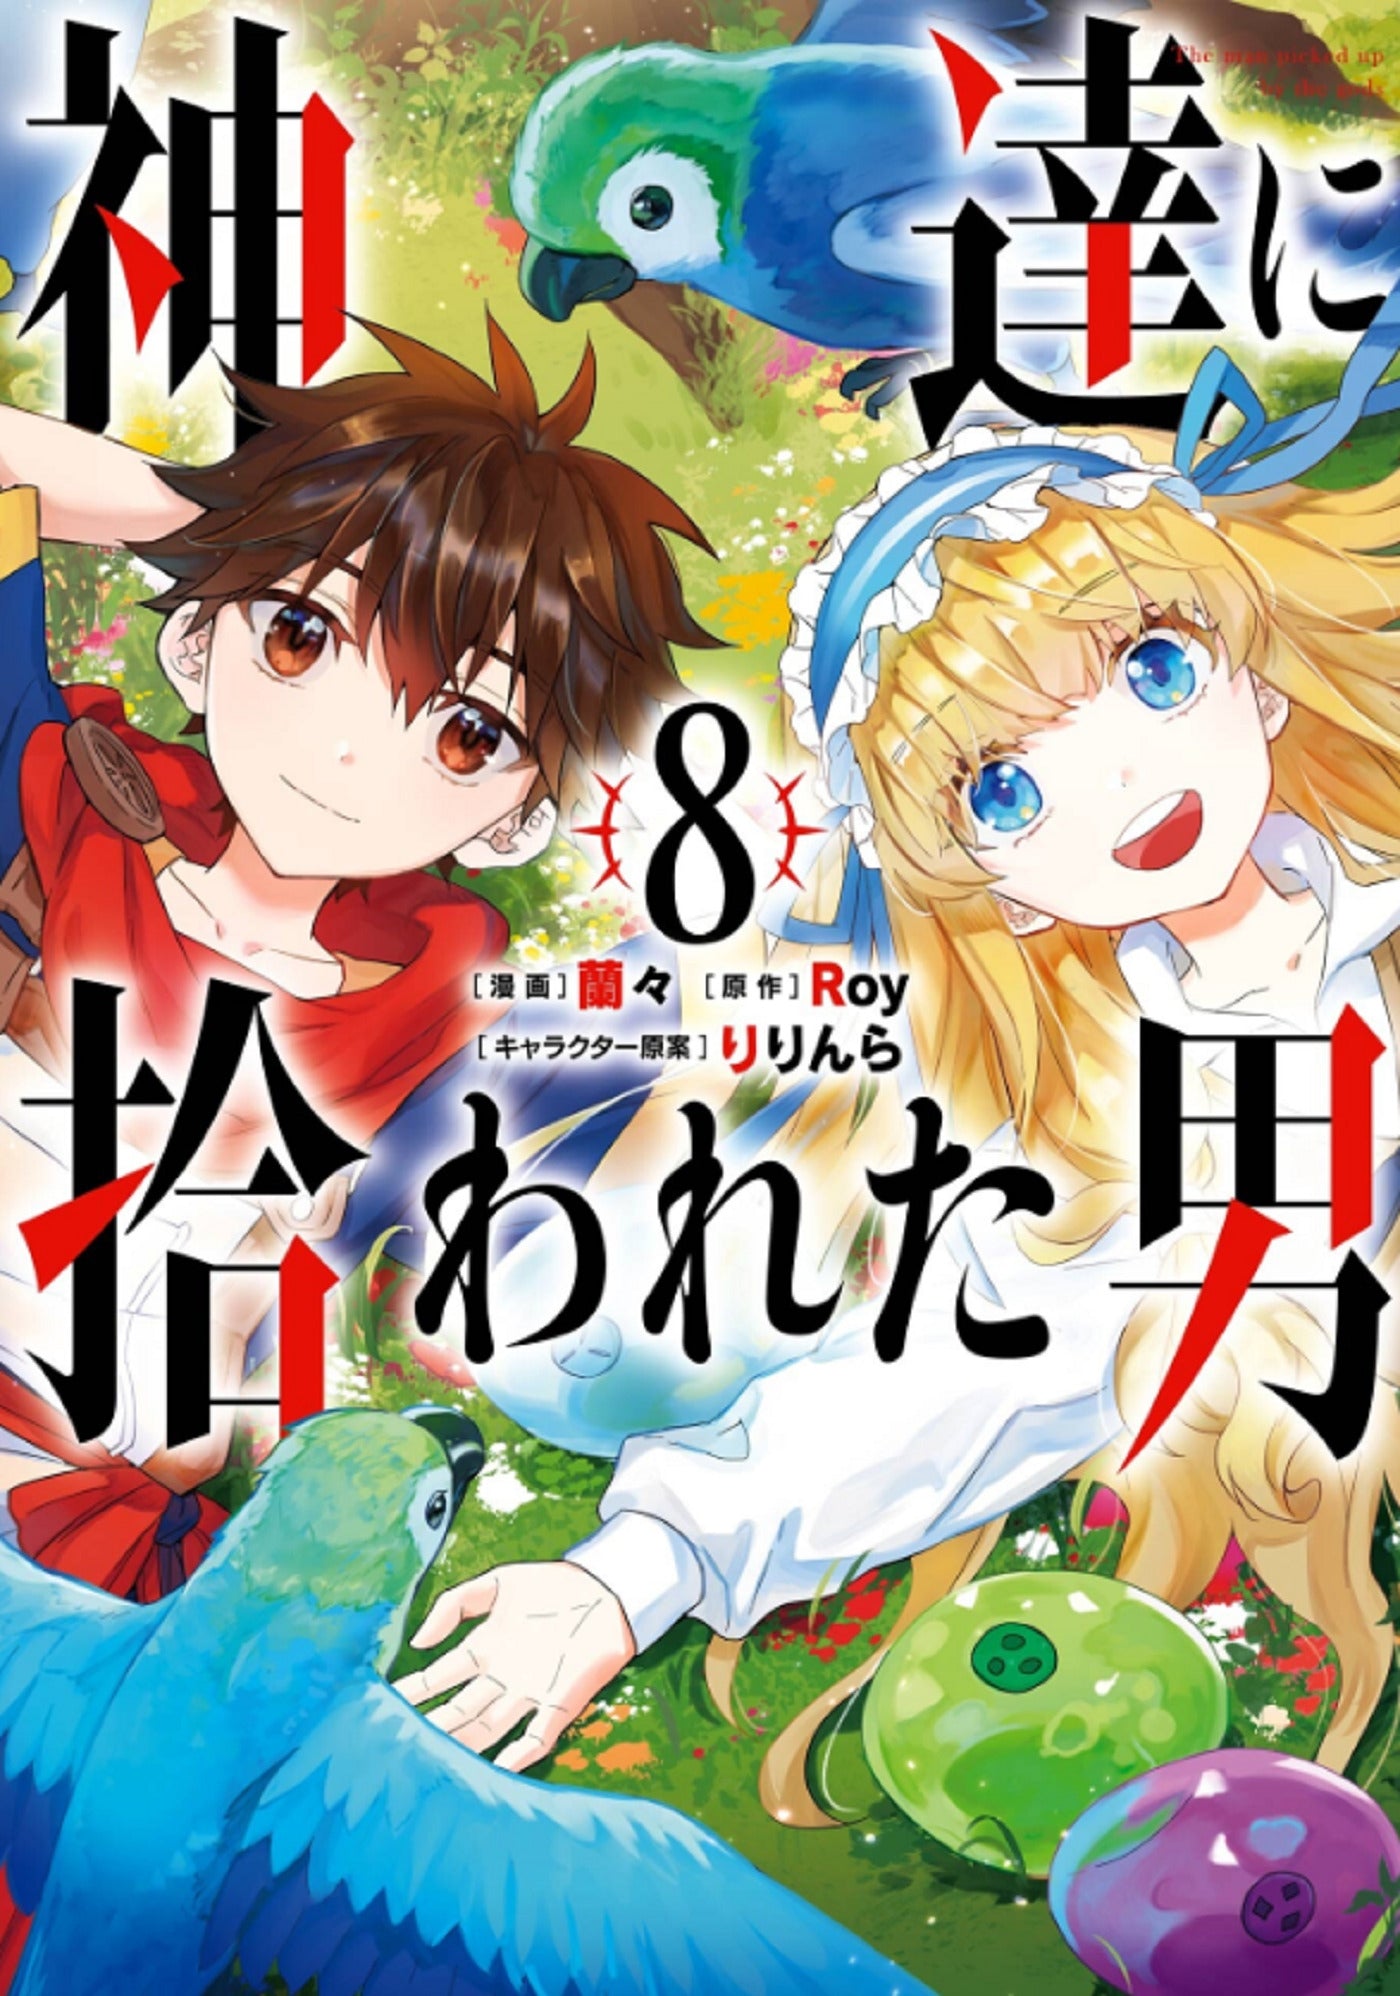 By the Grace of the Gods Vol, 8 (Manga)